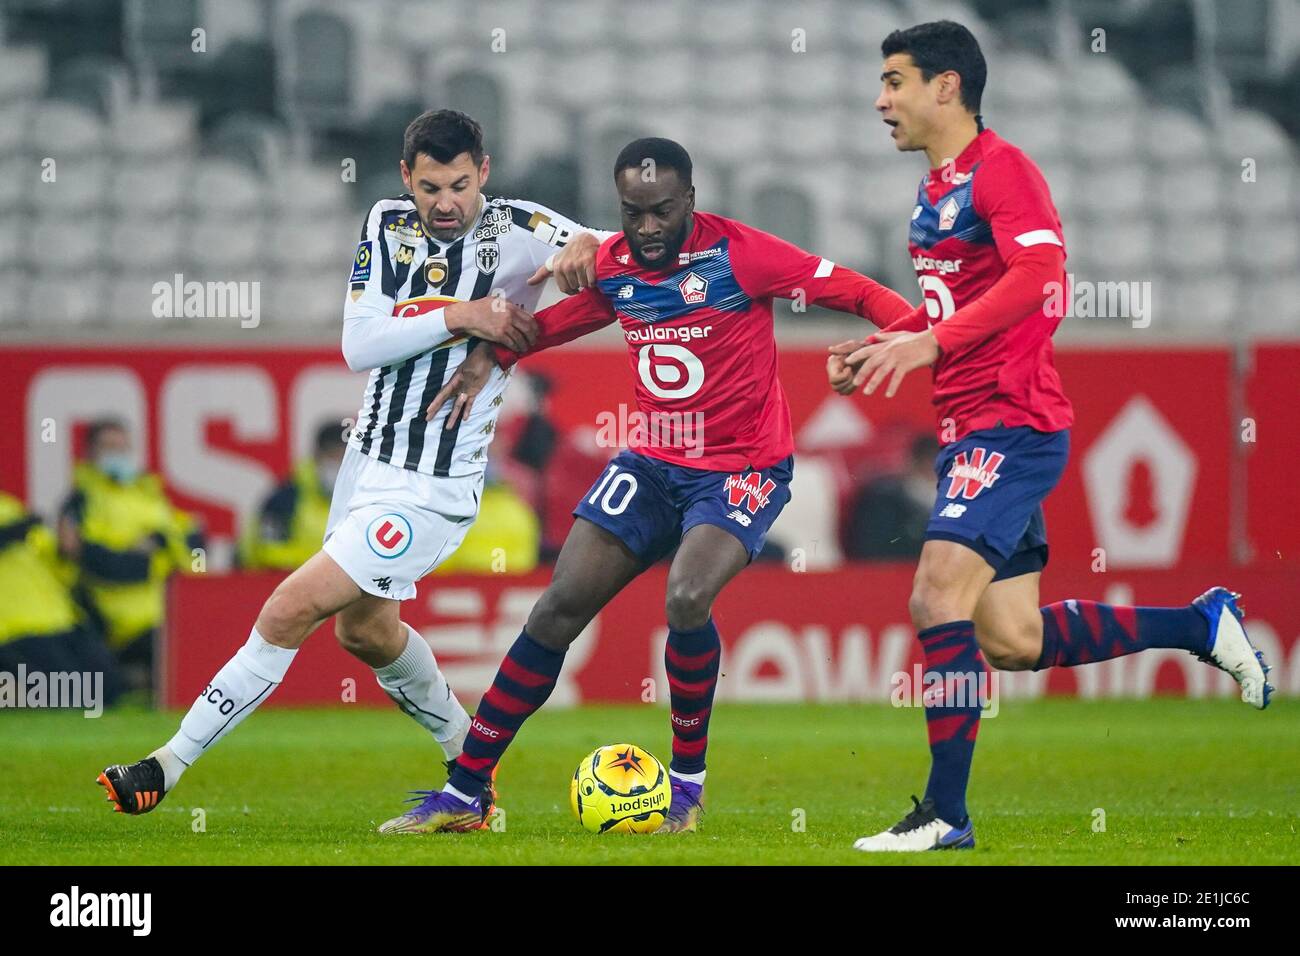 LILLE, FRANCE - JANUARY 6: Thomas Mangani of Angers SCO, Jonathan Ikone of Lille OSC during the Ligue 1 match between Lille OSC and Angers SCO at Stad Stock Photo